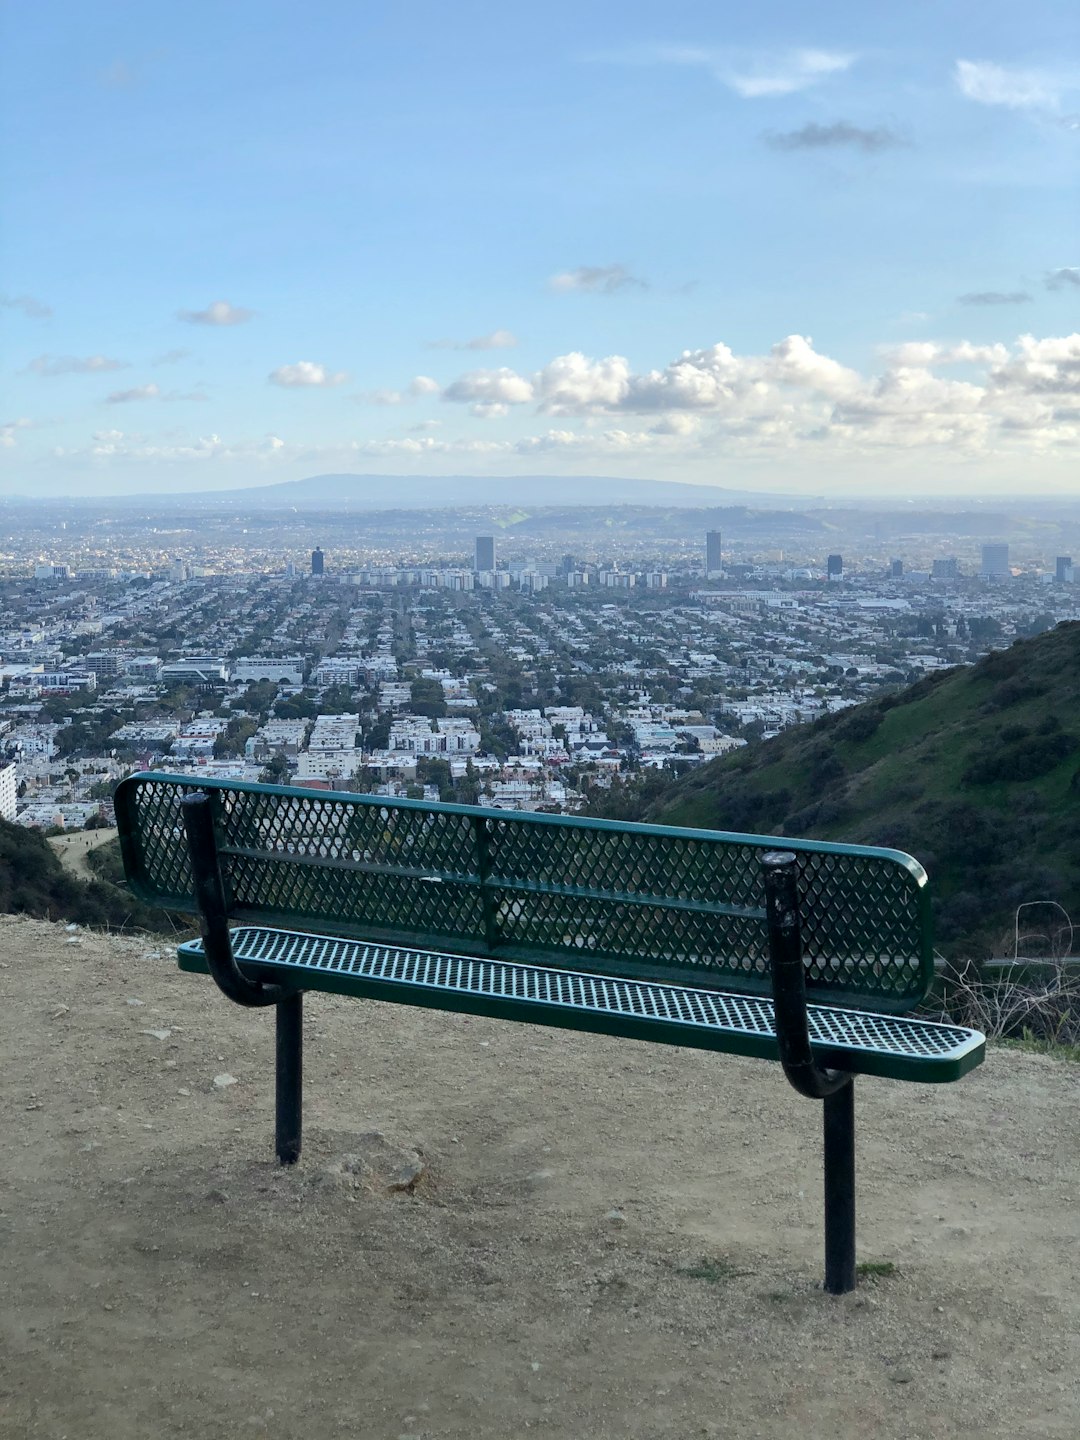 Travel Tips and Stories of Runyon Canyon Park in United States